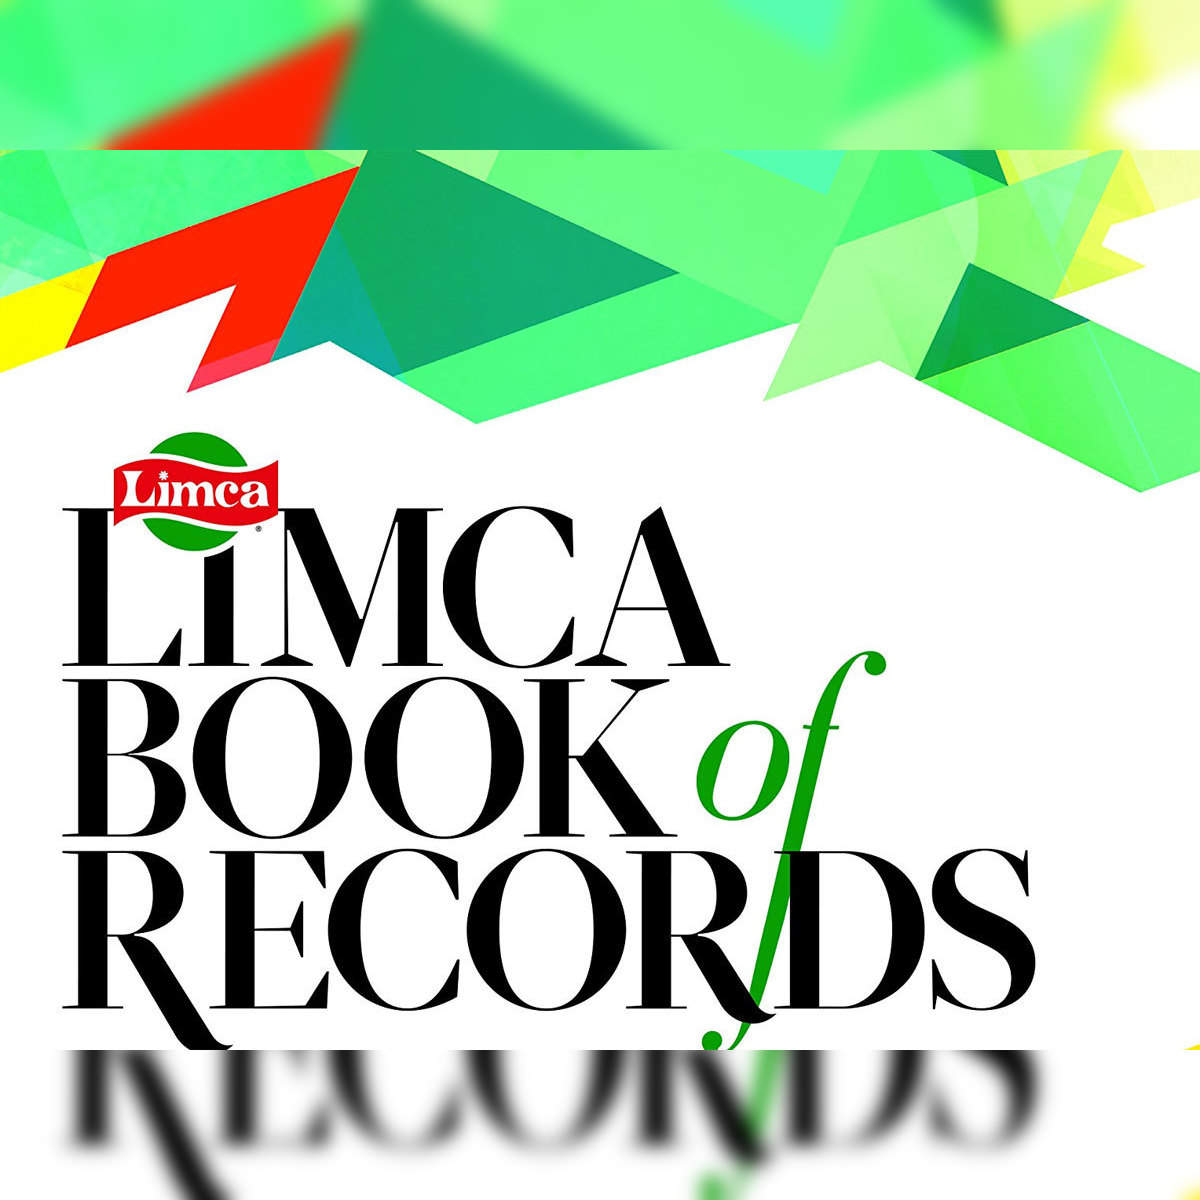 LIMCA Photos, Images and Wallpapers - MouthShut.com